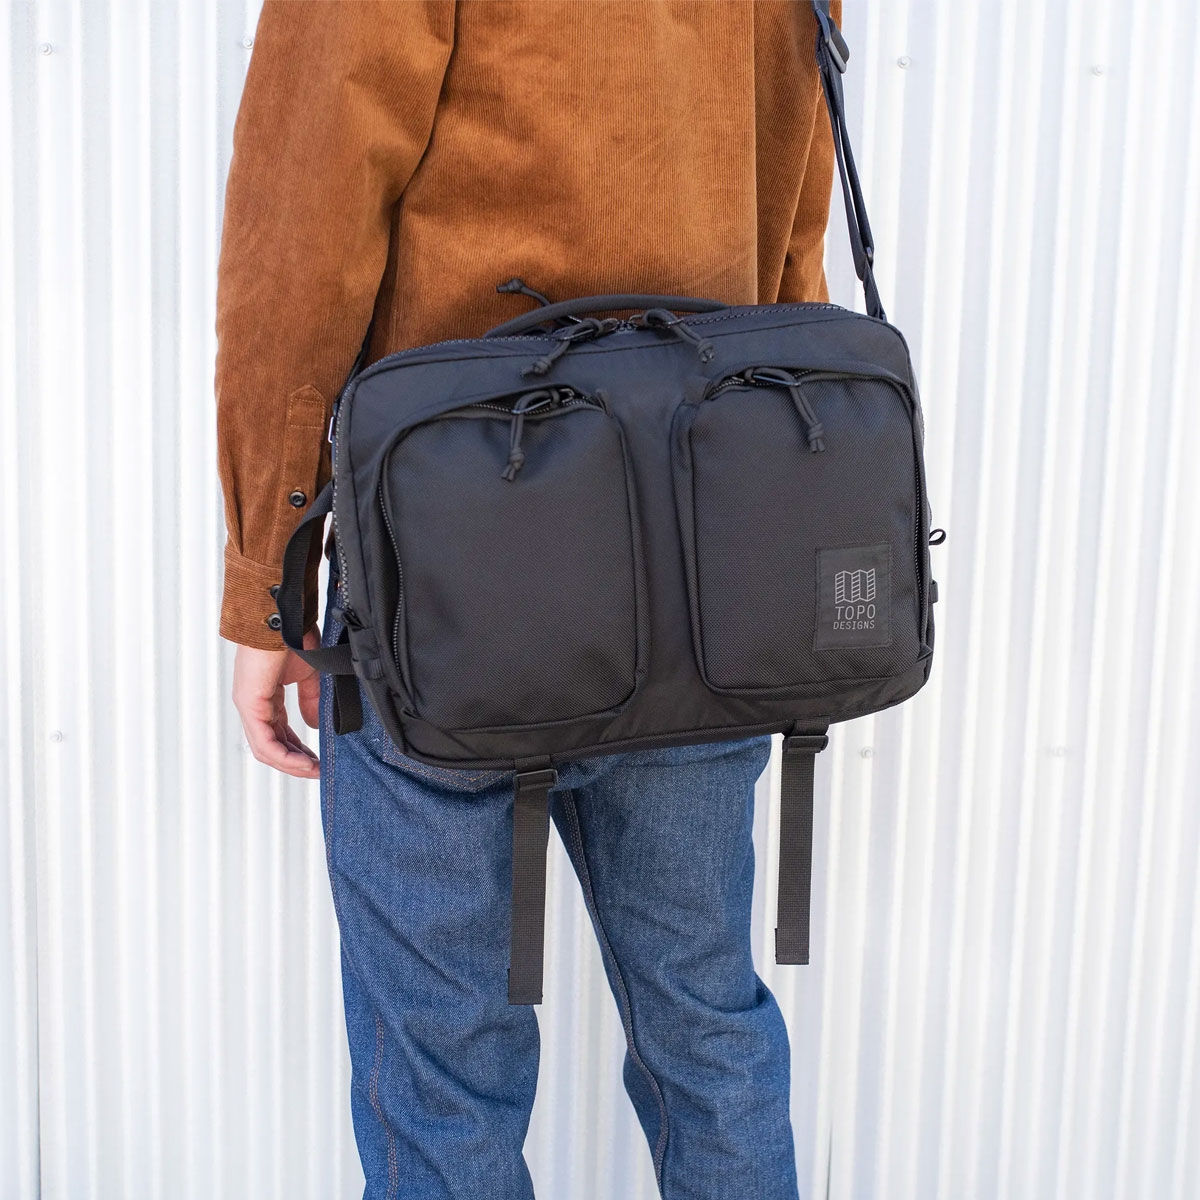 Topo Designs Global Briefcase Ballistic Black, the perfect bag for everyday carry